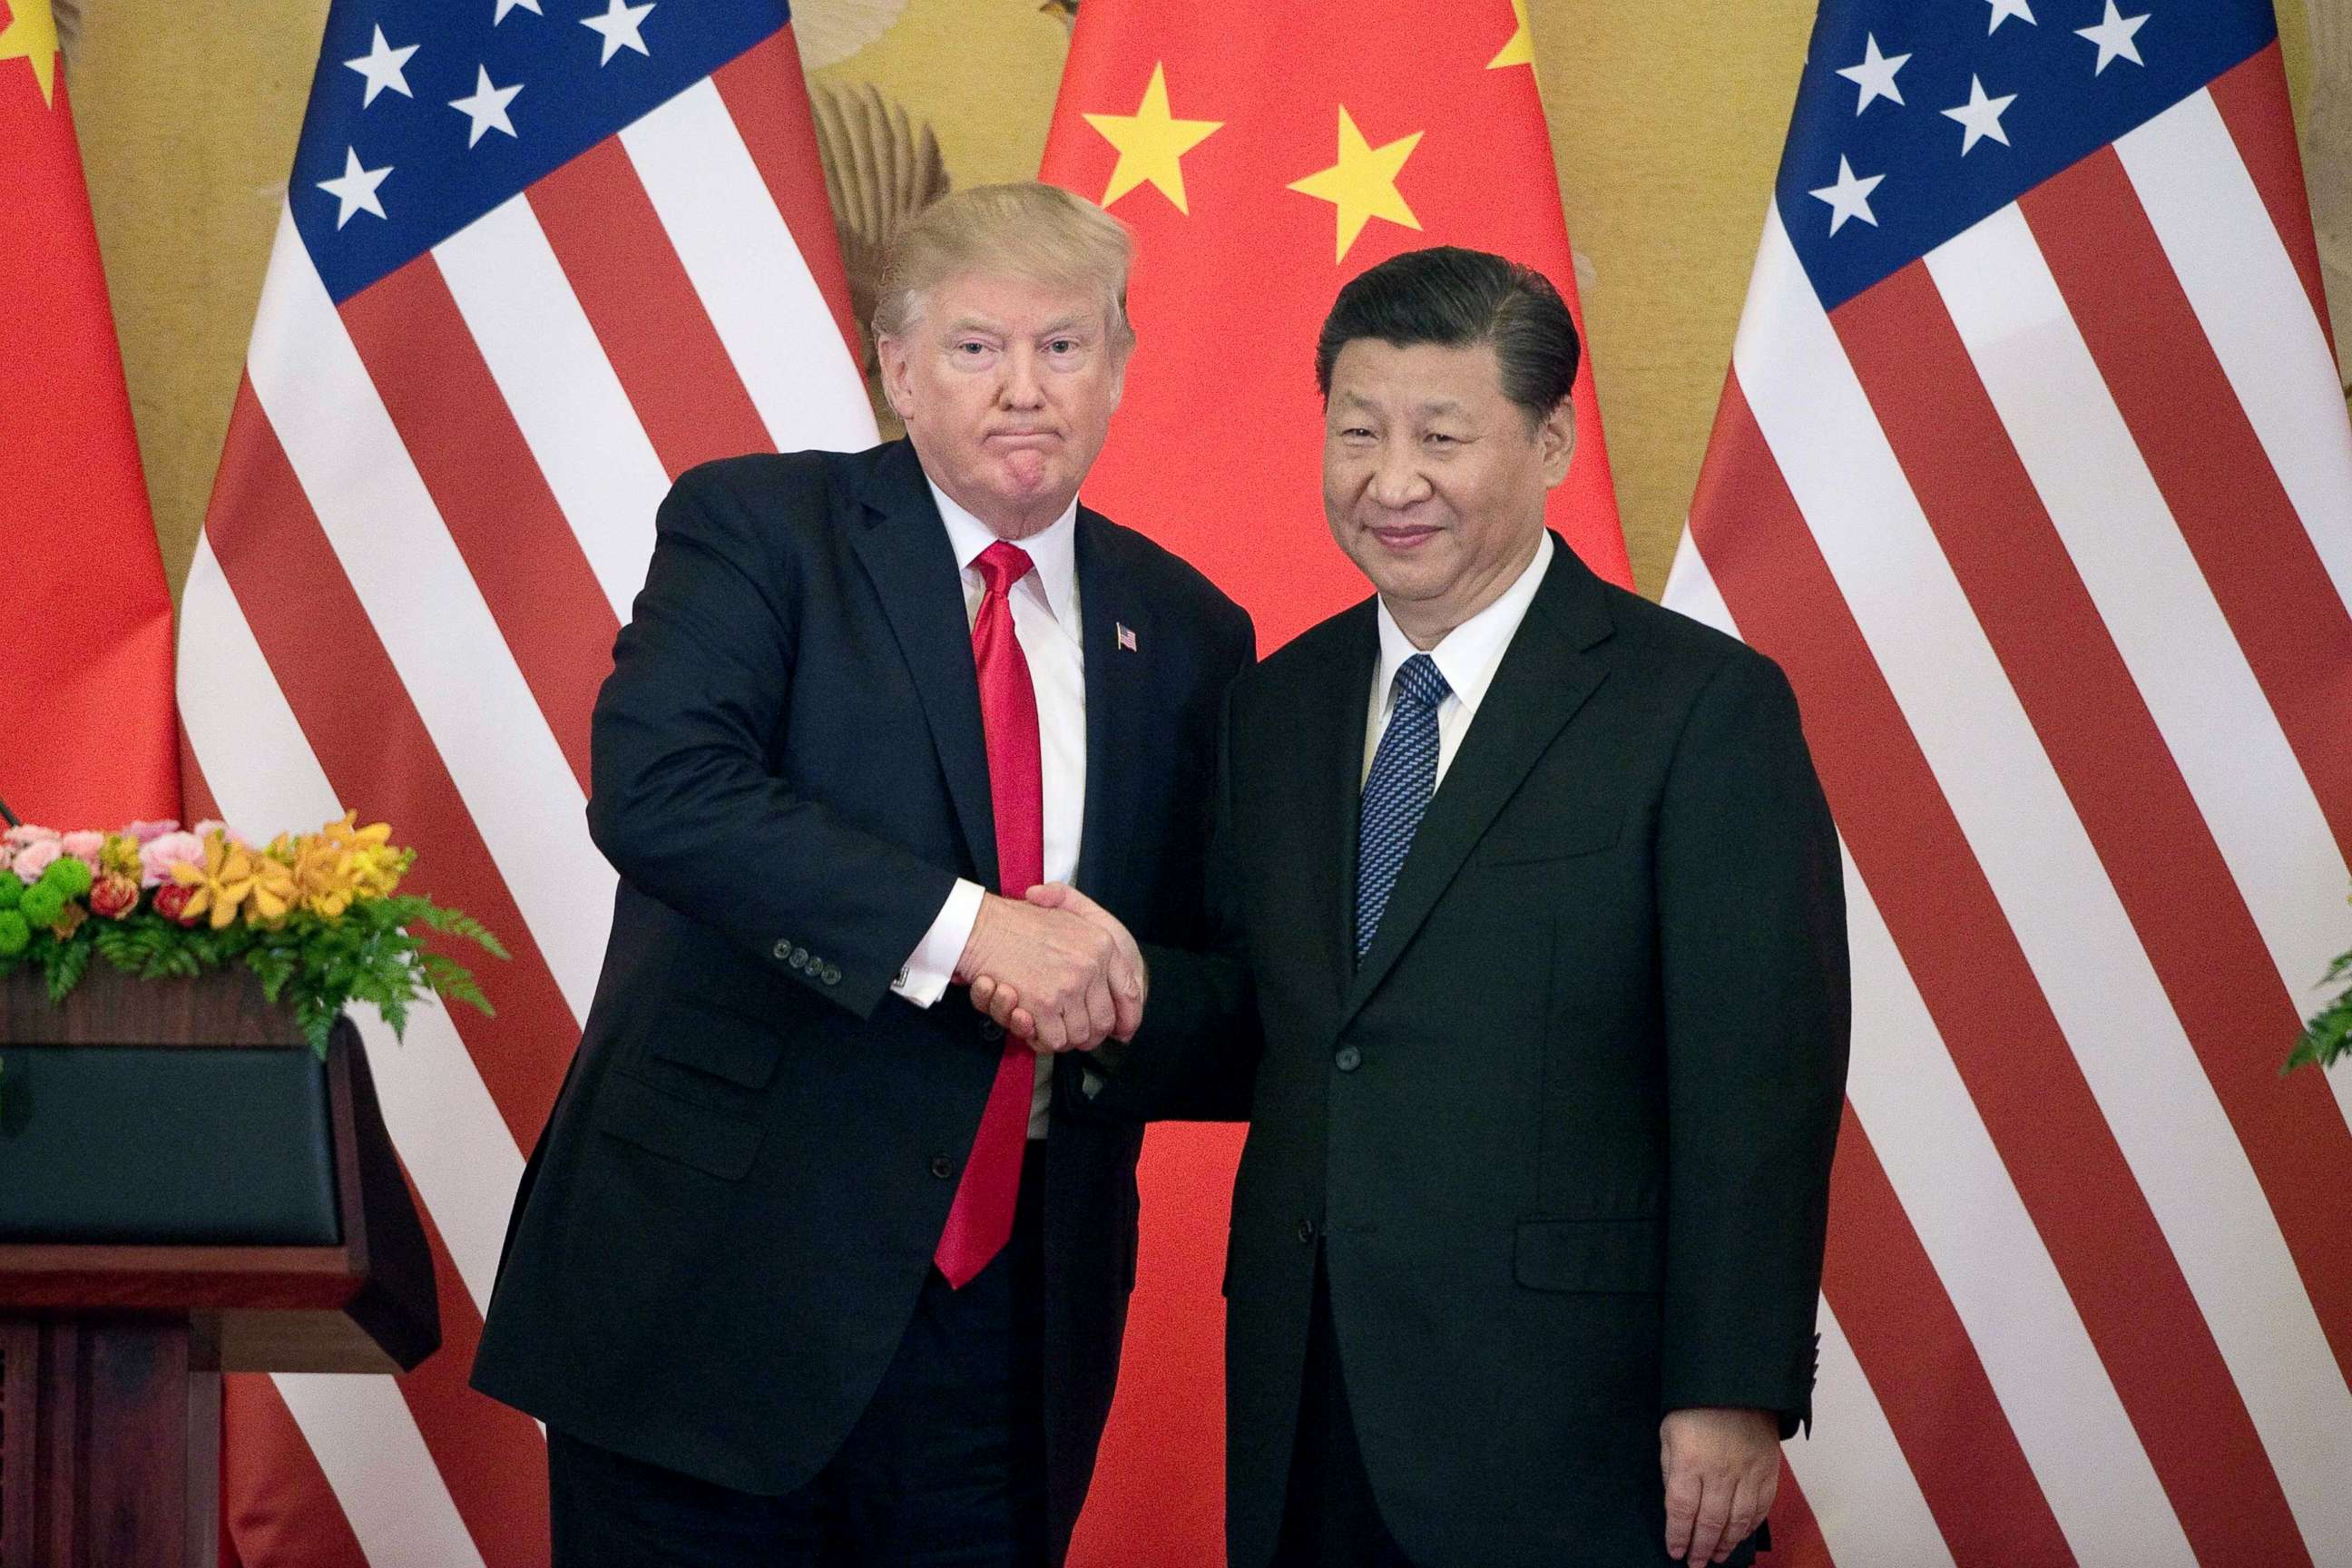 PHOTO: President Donald Trump shakes hands with China's President Xi Jinping during a press conference at the Great Hall of the People in Beijing, Nov. 9, 2017.